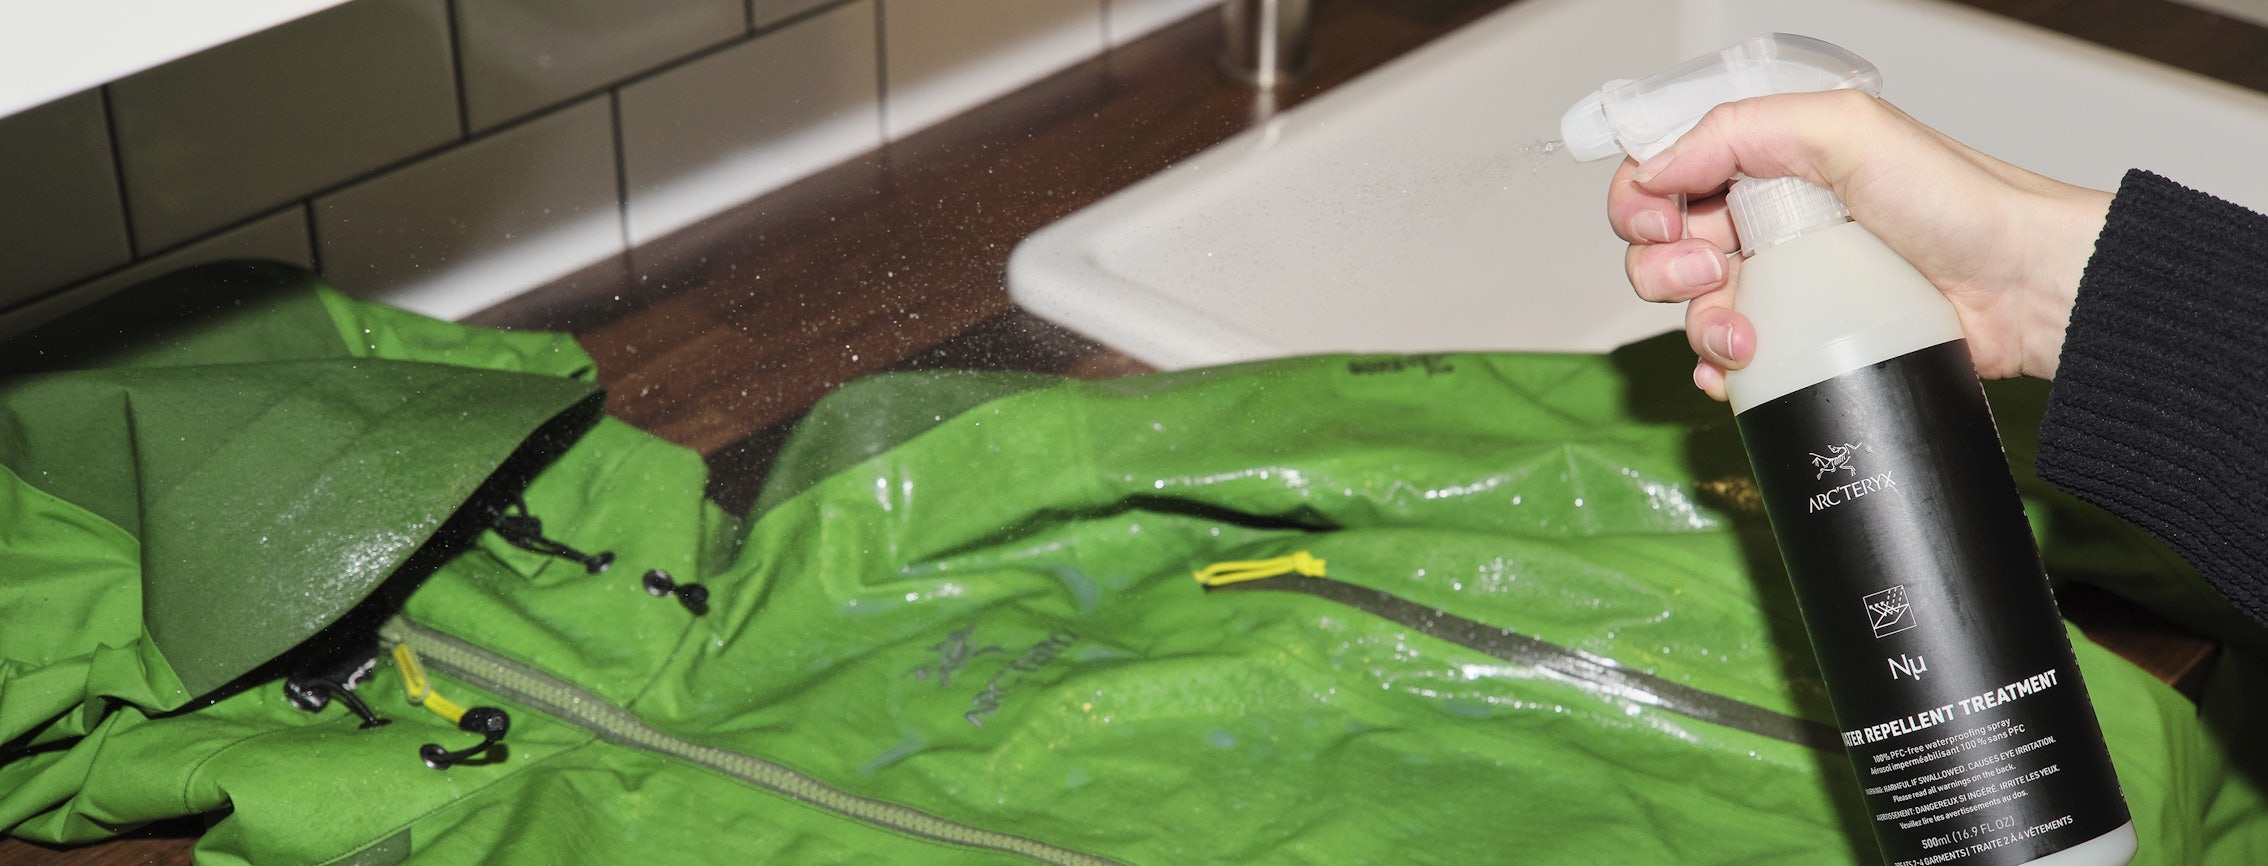 How to wash Gore-Tex clothing and restore Durable Water Repellency